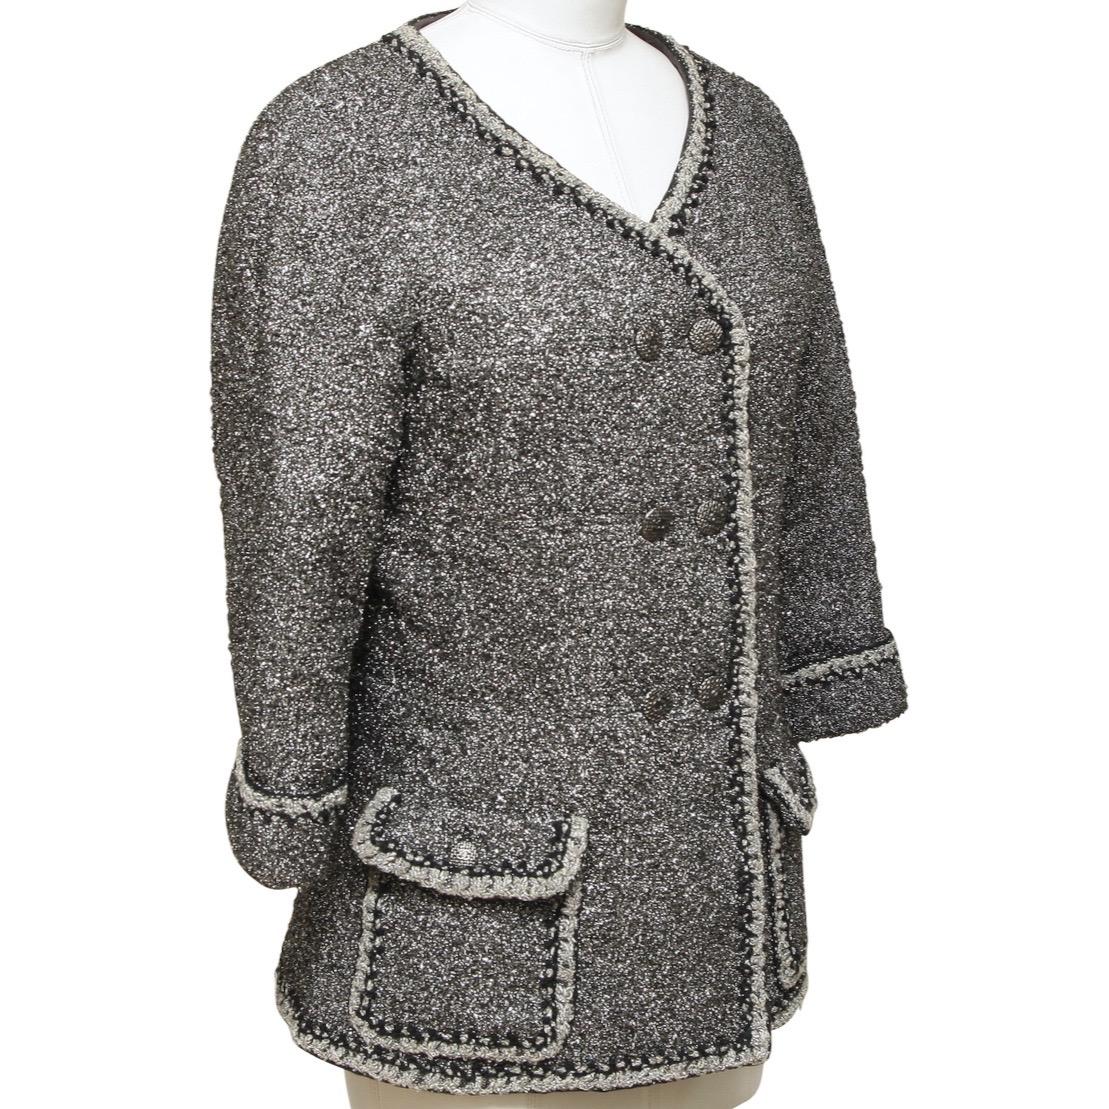 GUARANTEED AUTHENTIC CHANEL 2014 SPRING COLLECTION METALLIC FANTASY TWEED DOUBLE BREAST JACKET

Retailed excluding sales taxes $4,920.

Details:
• Double breast jacket in a silver metallic fantasy tweed.
• Collarless.
• V-neck.
• Front flap